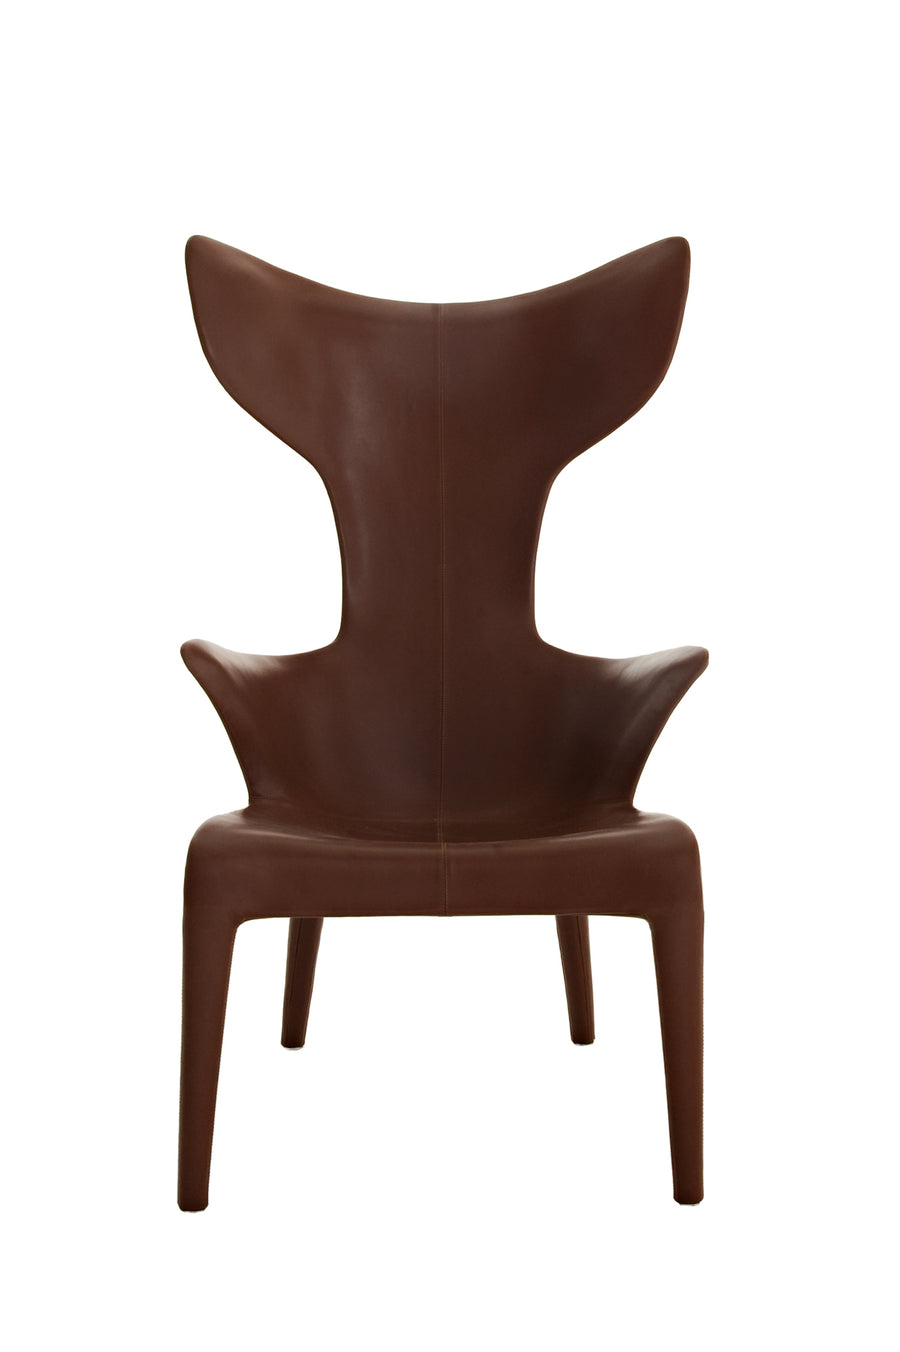 LOU READ Armchair by Philippe Starck with Eugeni Quitllet for Driade - DUPLEX DESIGN